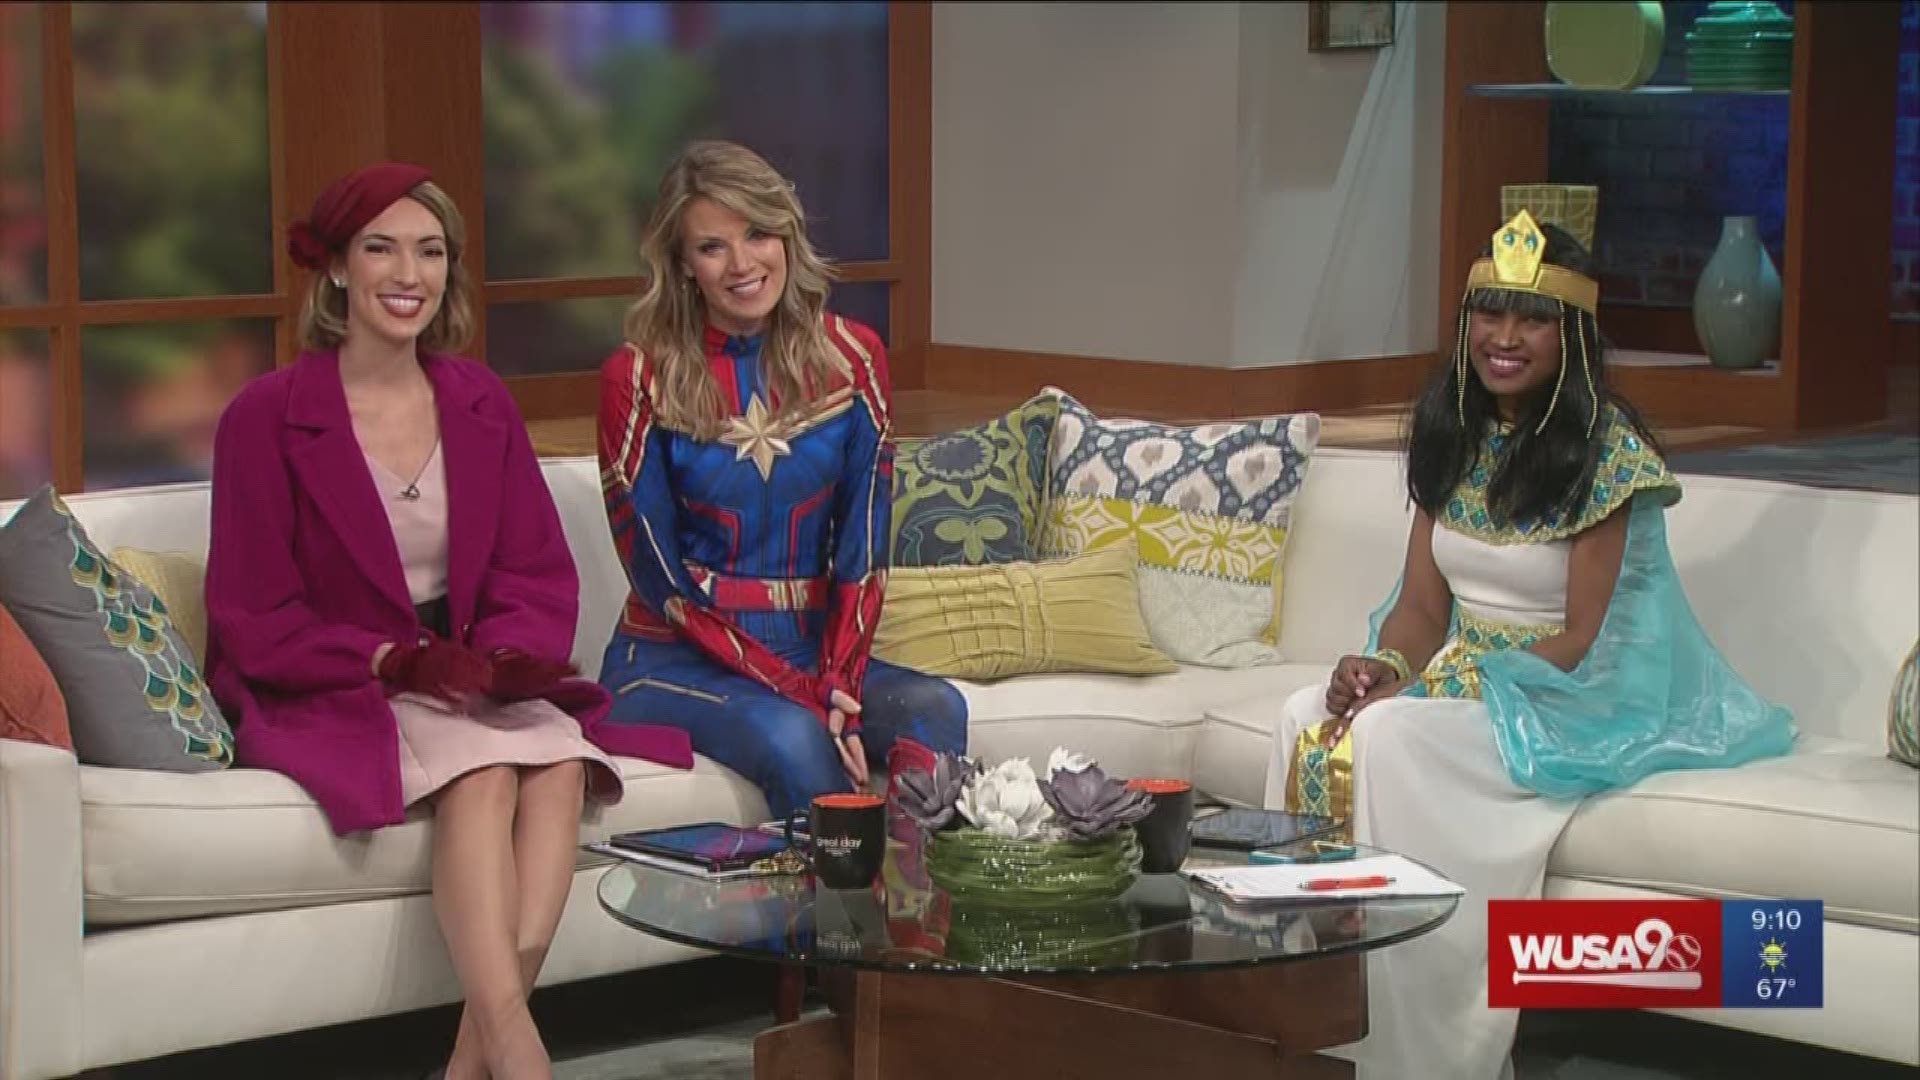 For our Morning Mix series, the gang is all dressed up talking giving details about this year's Halloween trends, facts, and trick or treat weather.